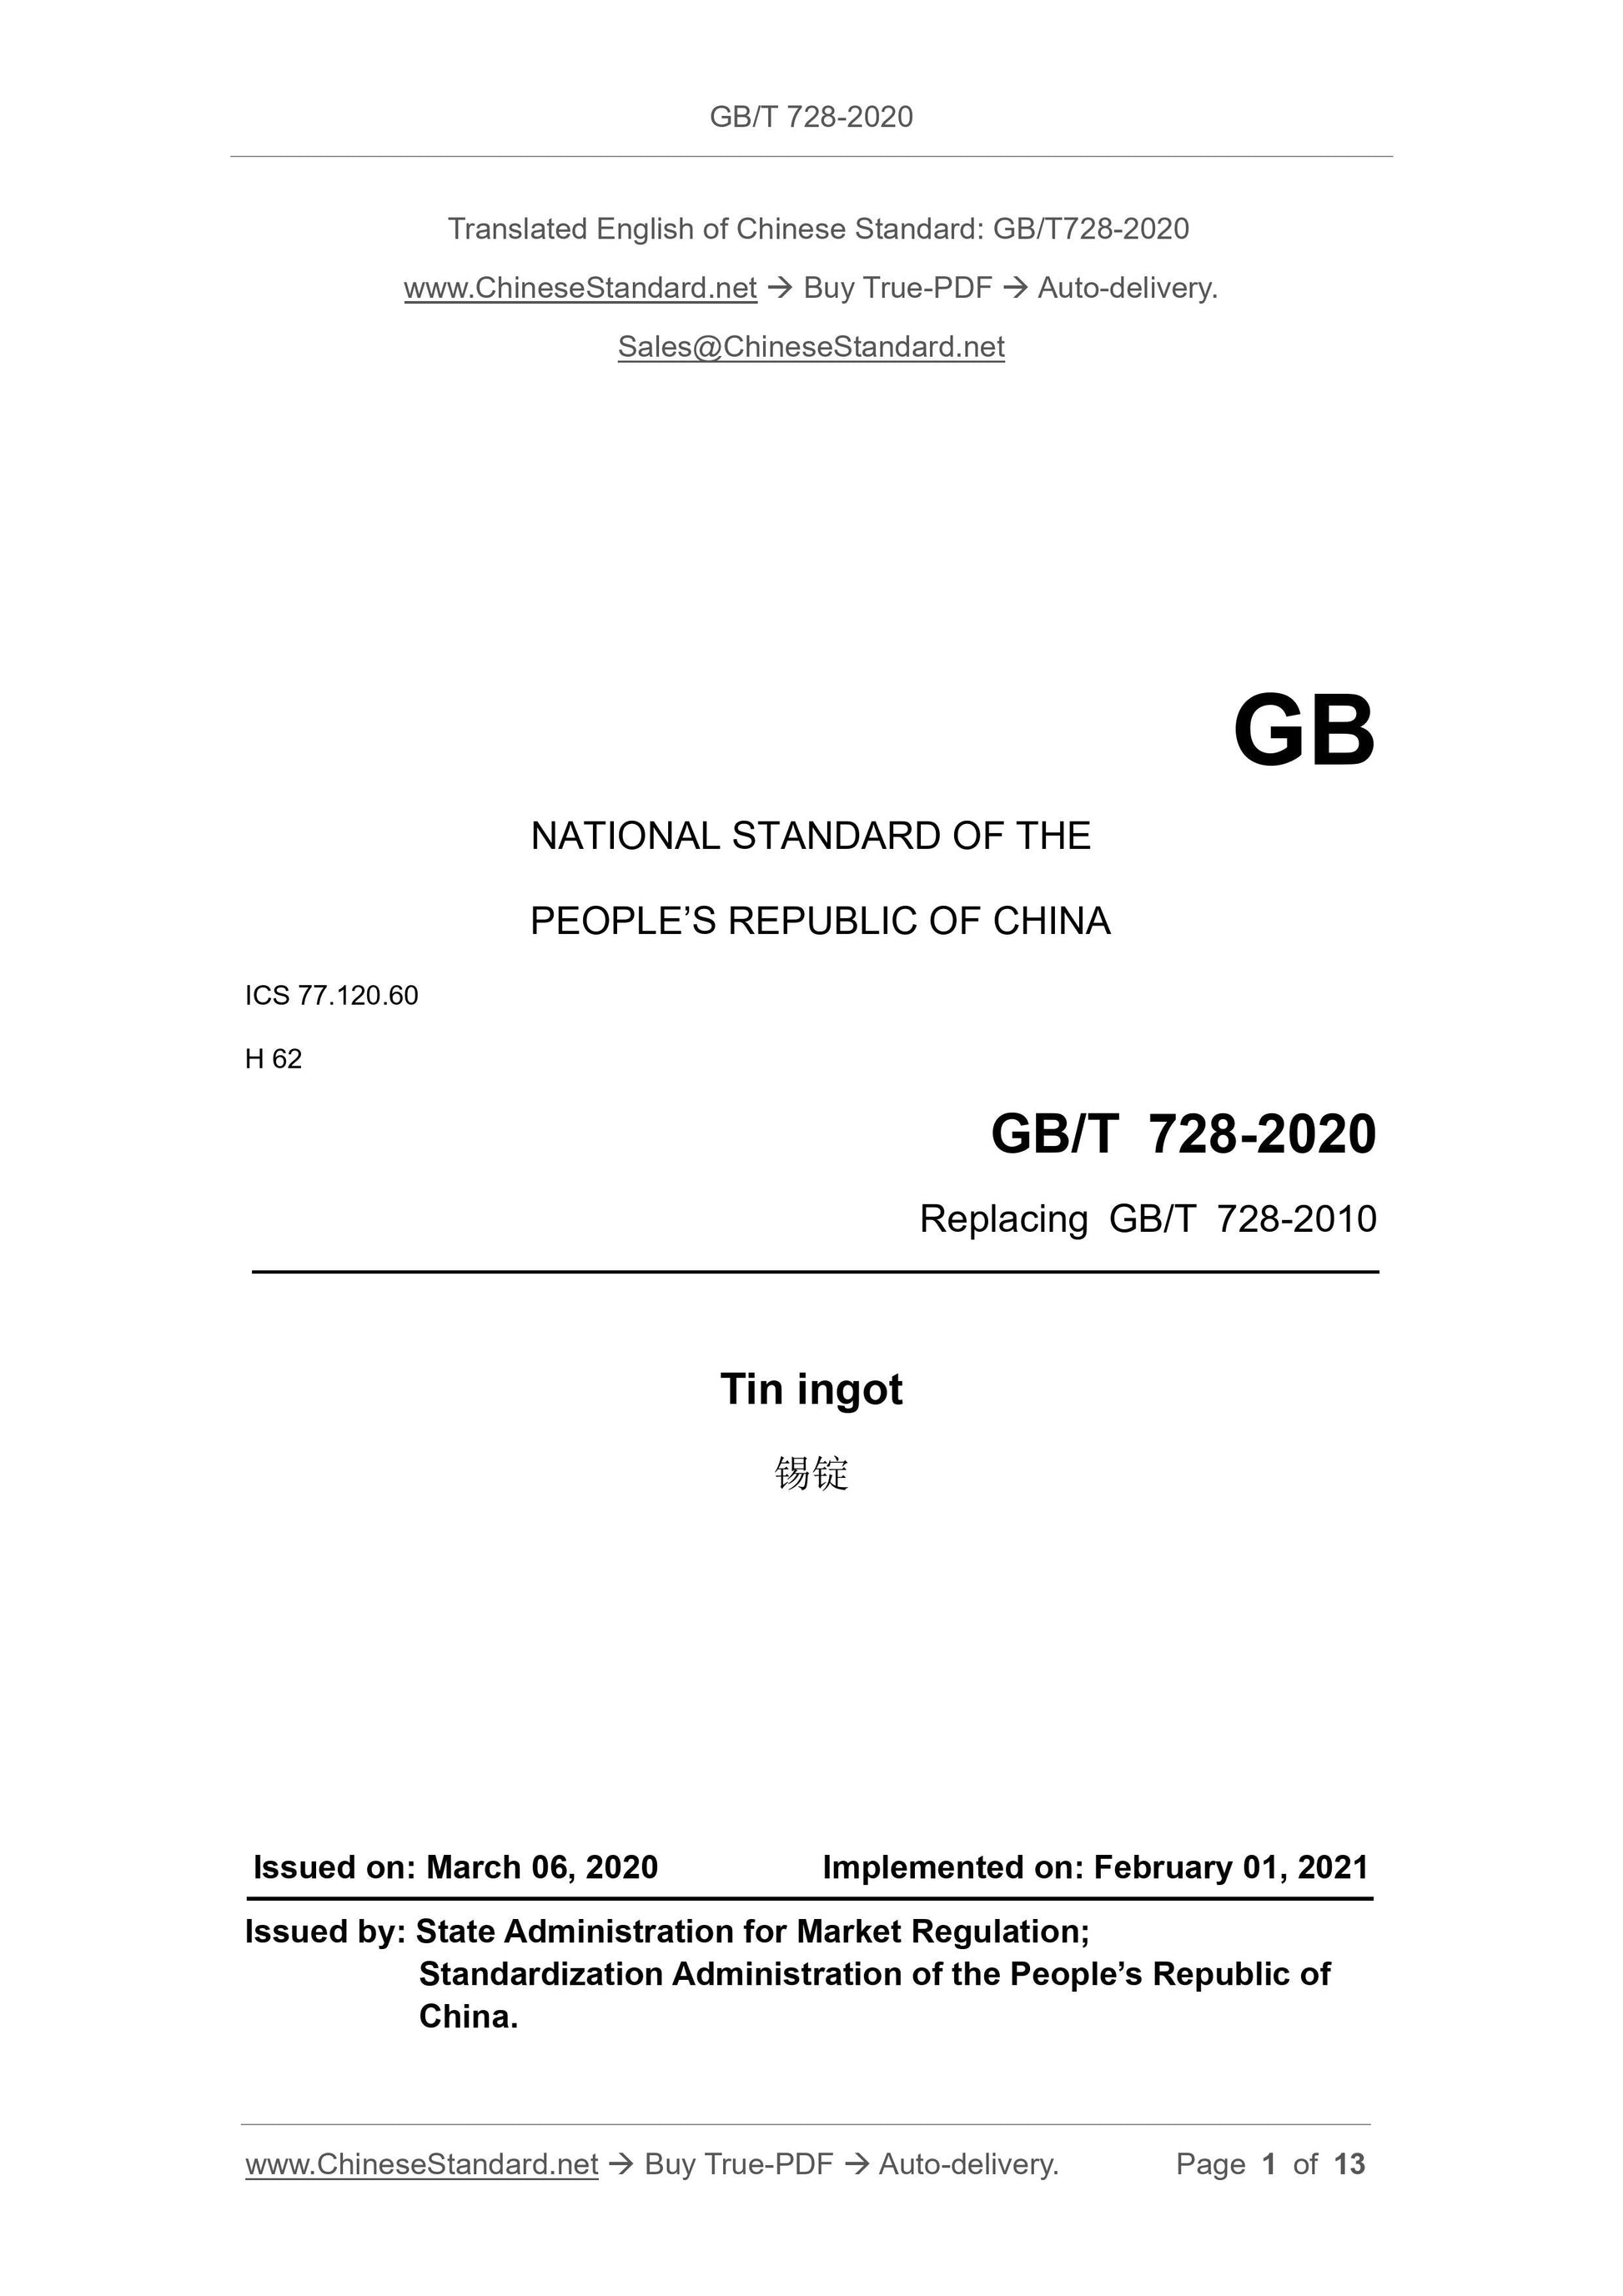 GB/T 728-2020 Page 1